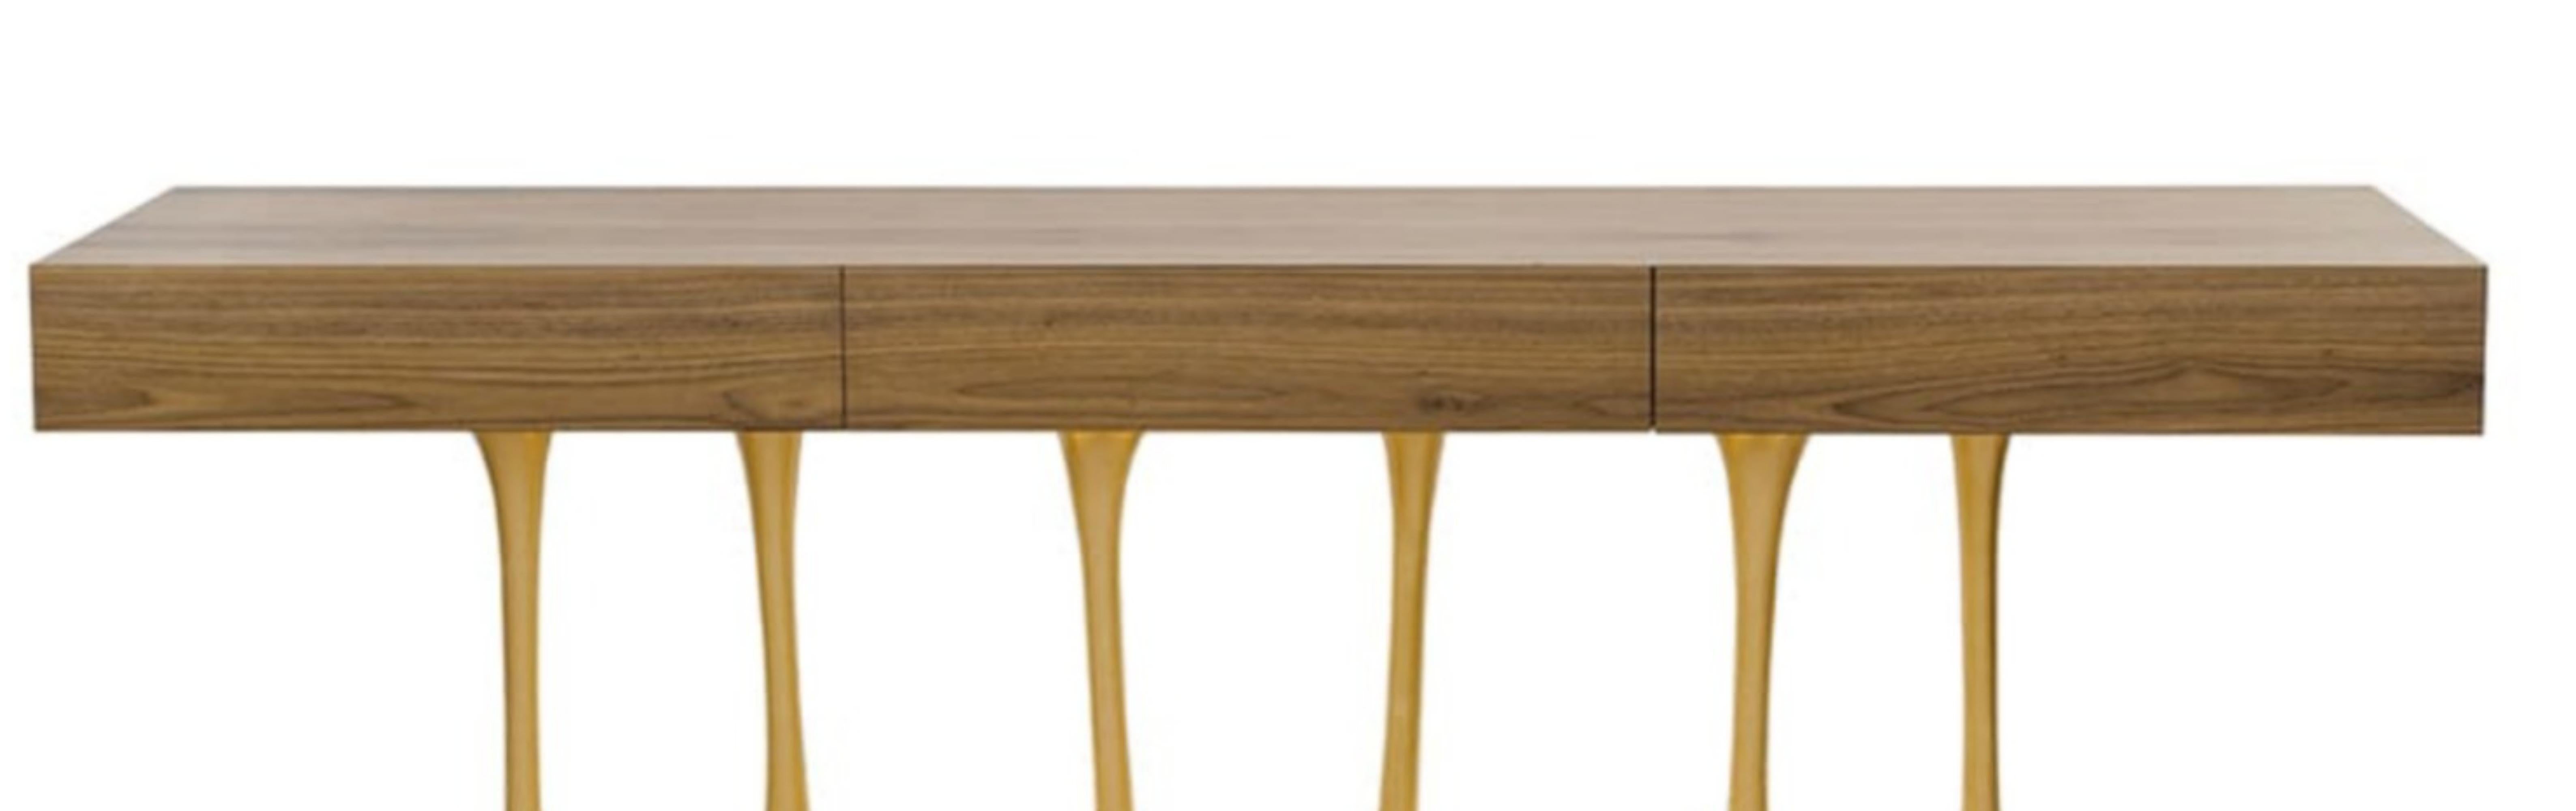 Portuguese New Design Console in Wood finished in Marron Wood High Gloss For Sale